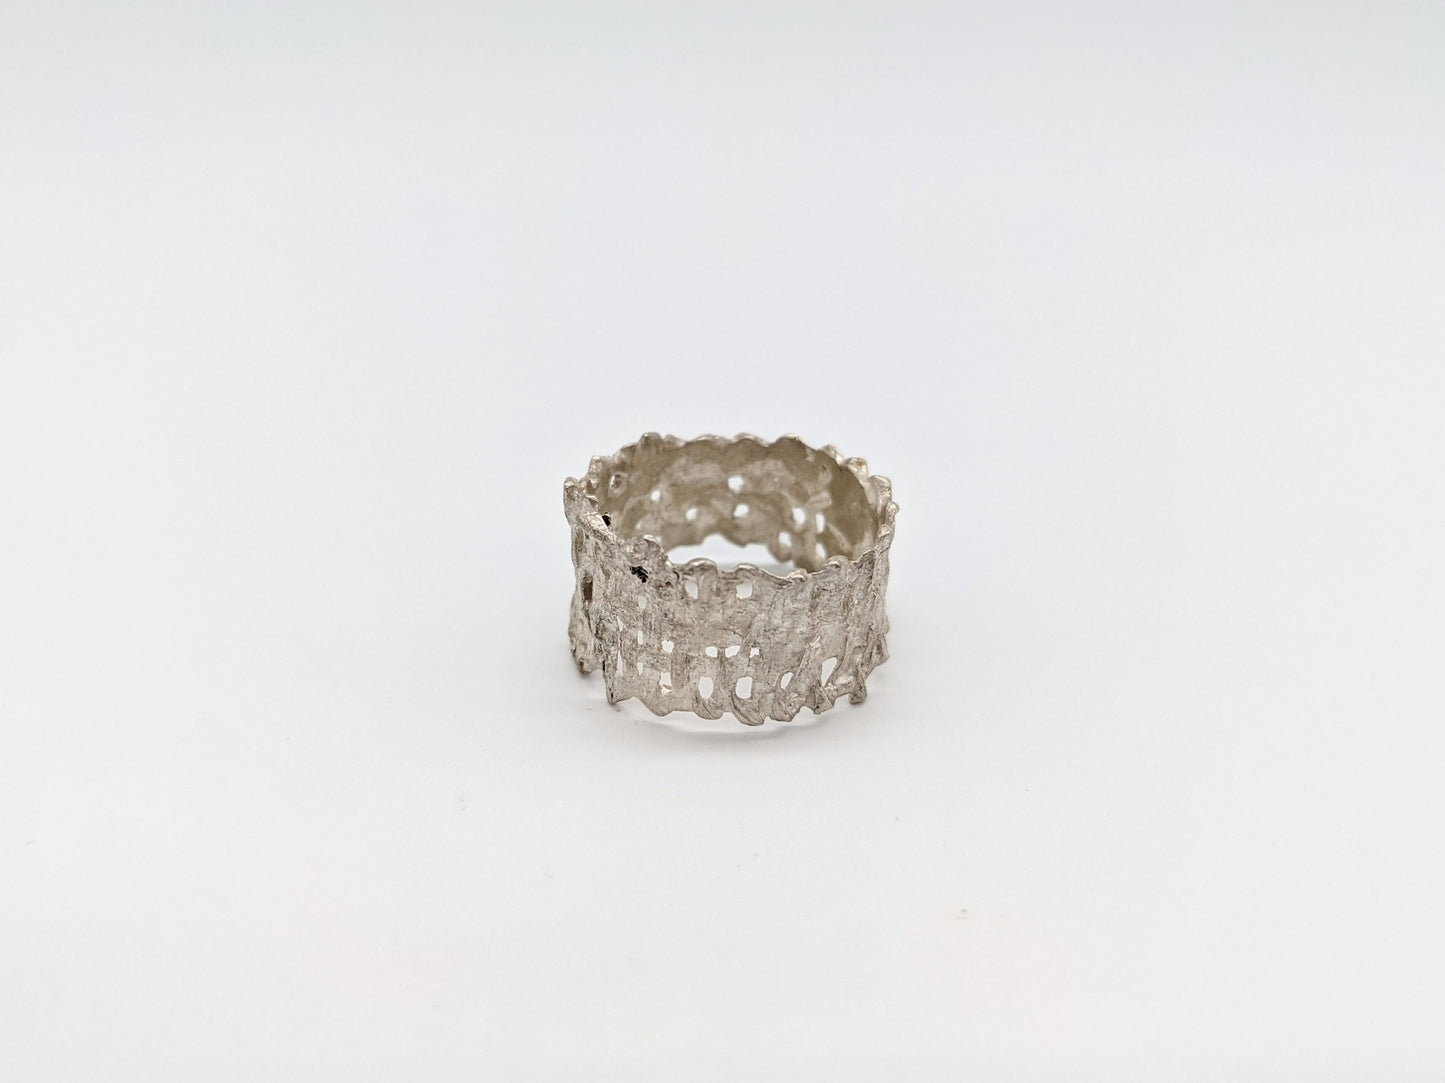 Cast Woven Ring